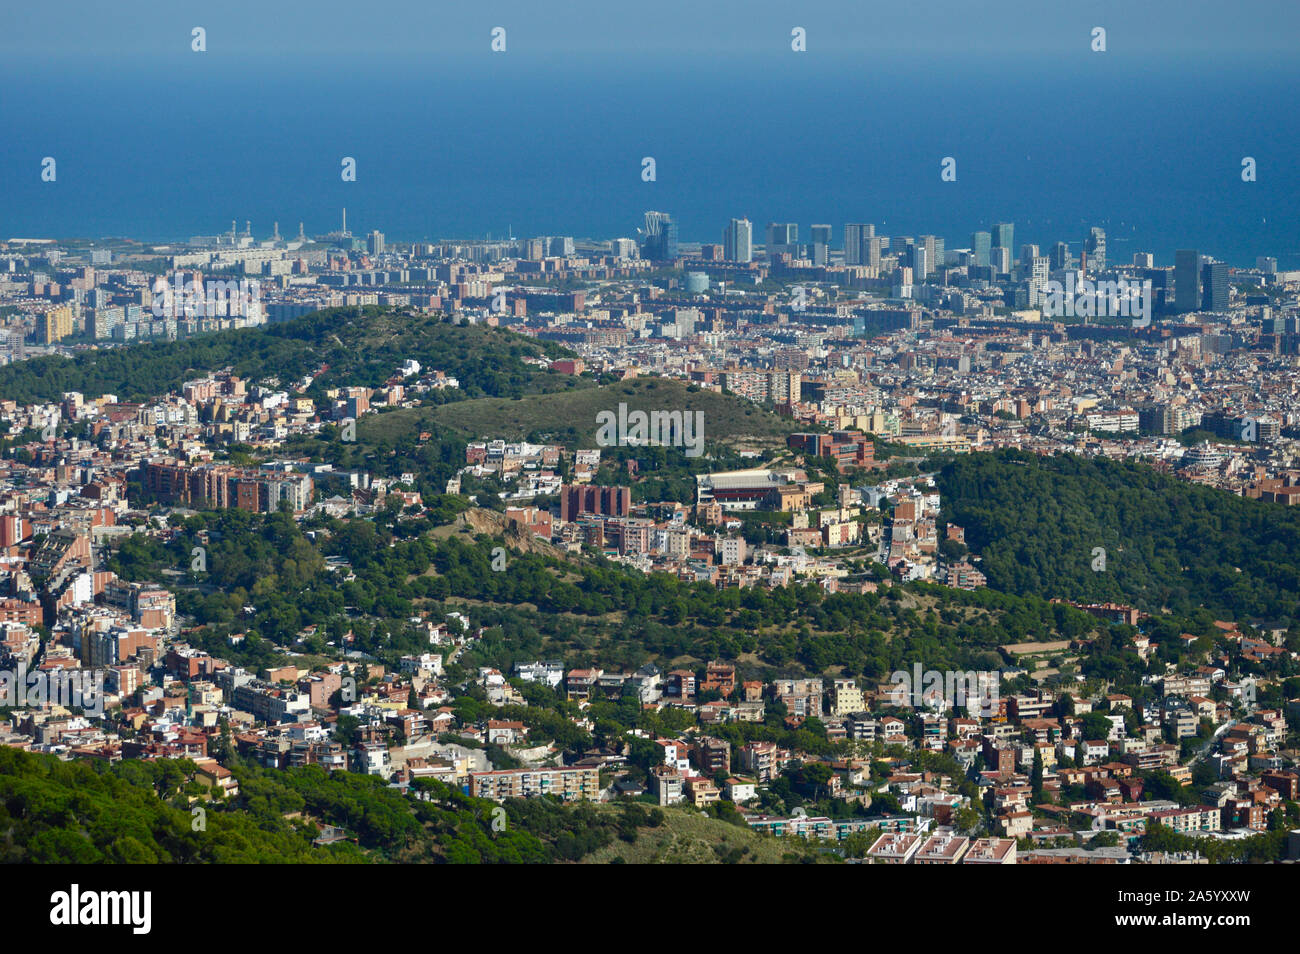 A view of Park Guell viewed from Tibidabo in Barcelona, Spain Stock Photo